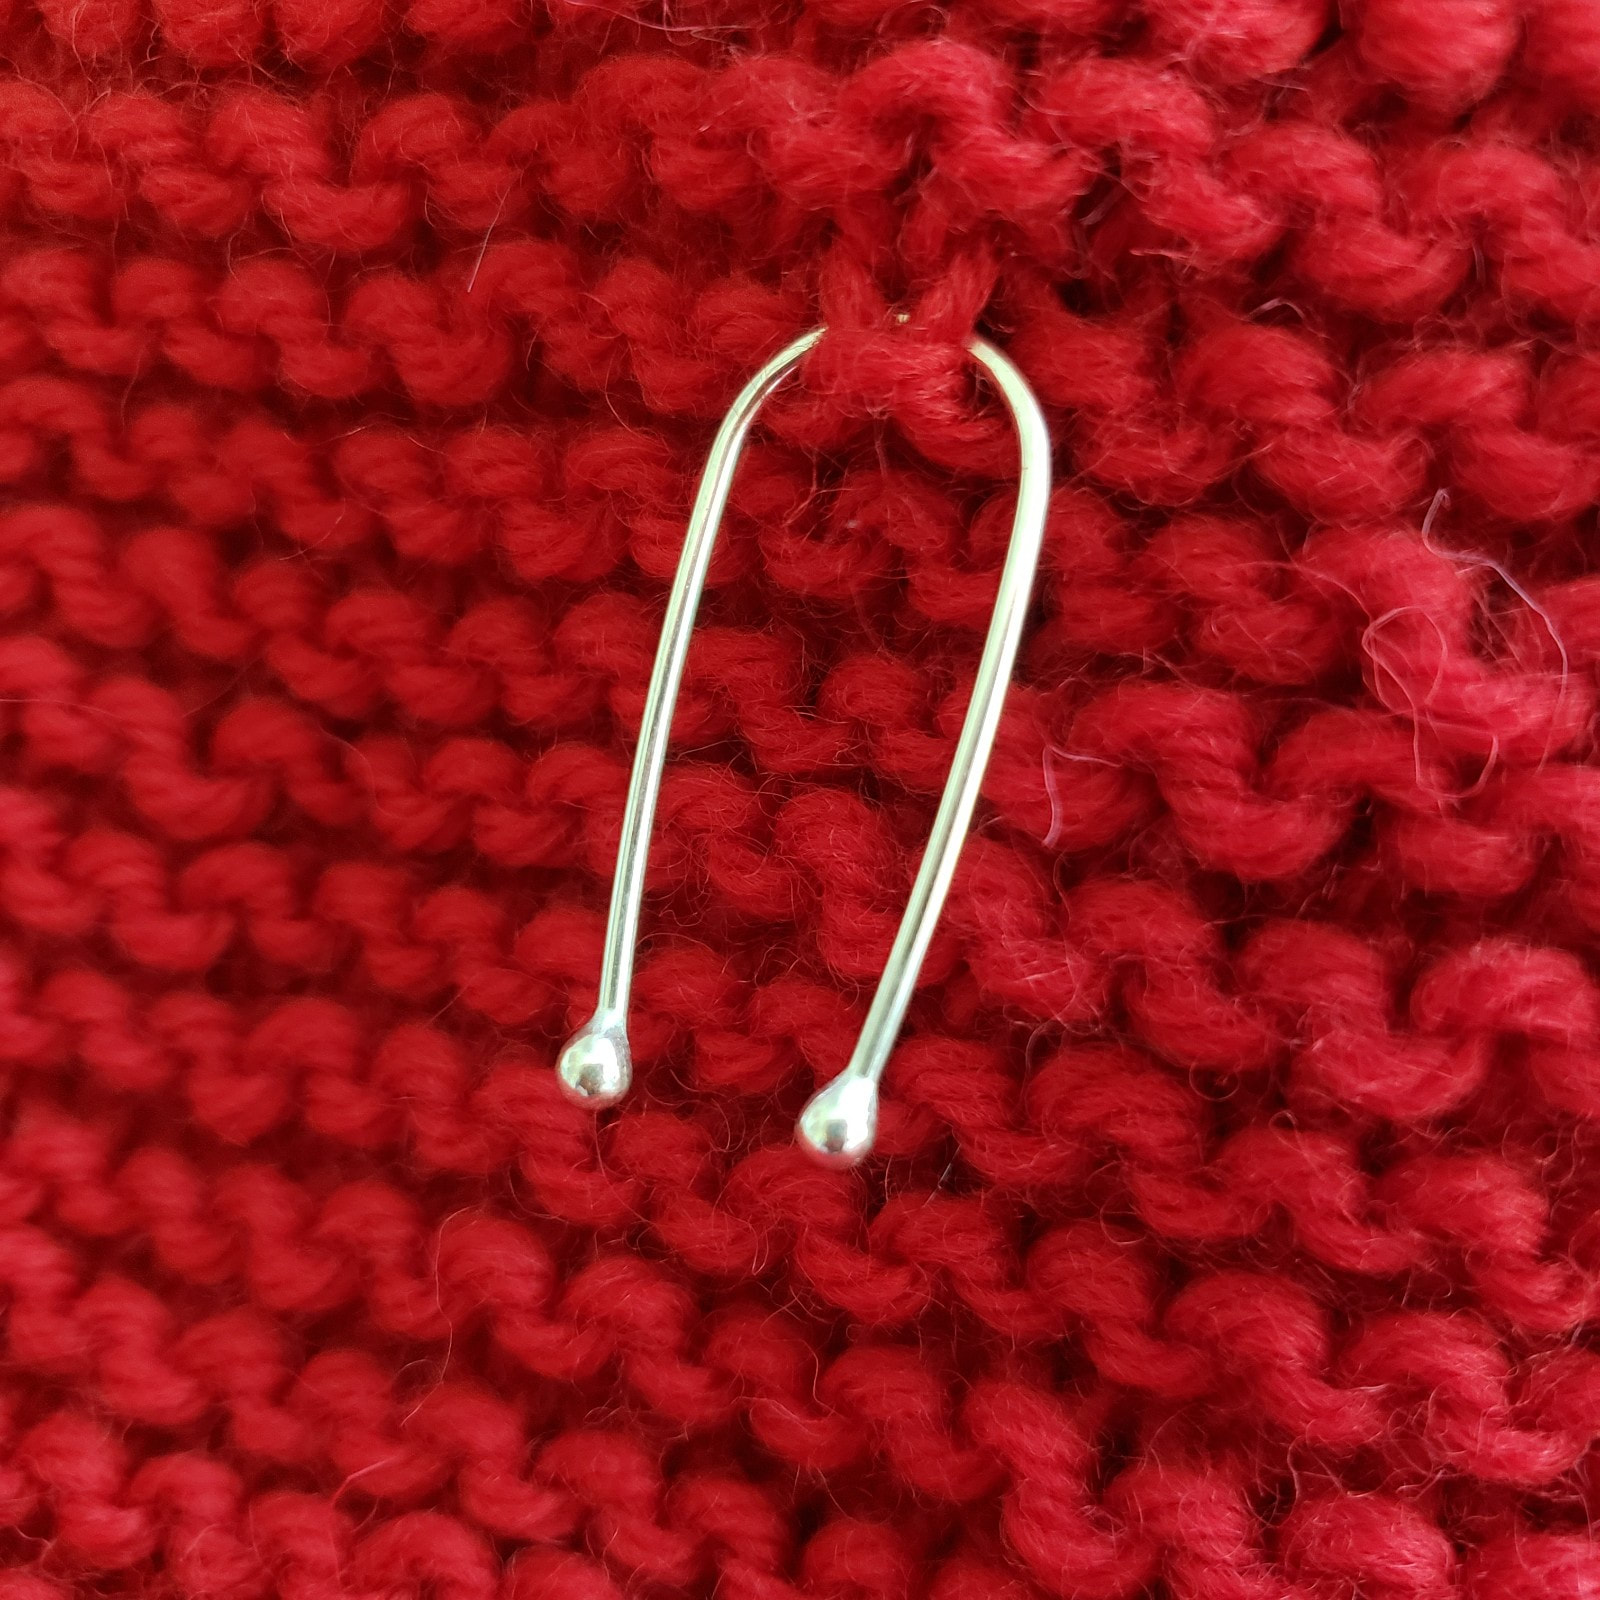 Stitch Markers Make Cables Easier — With Wool